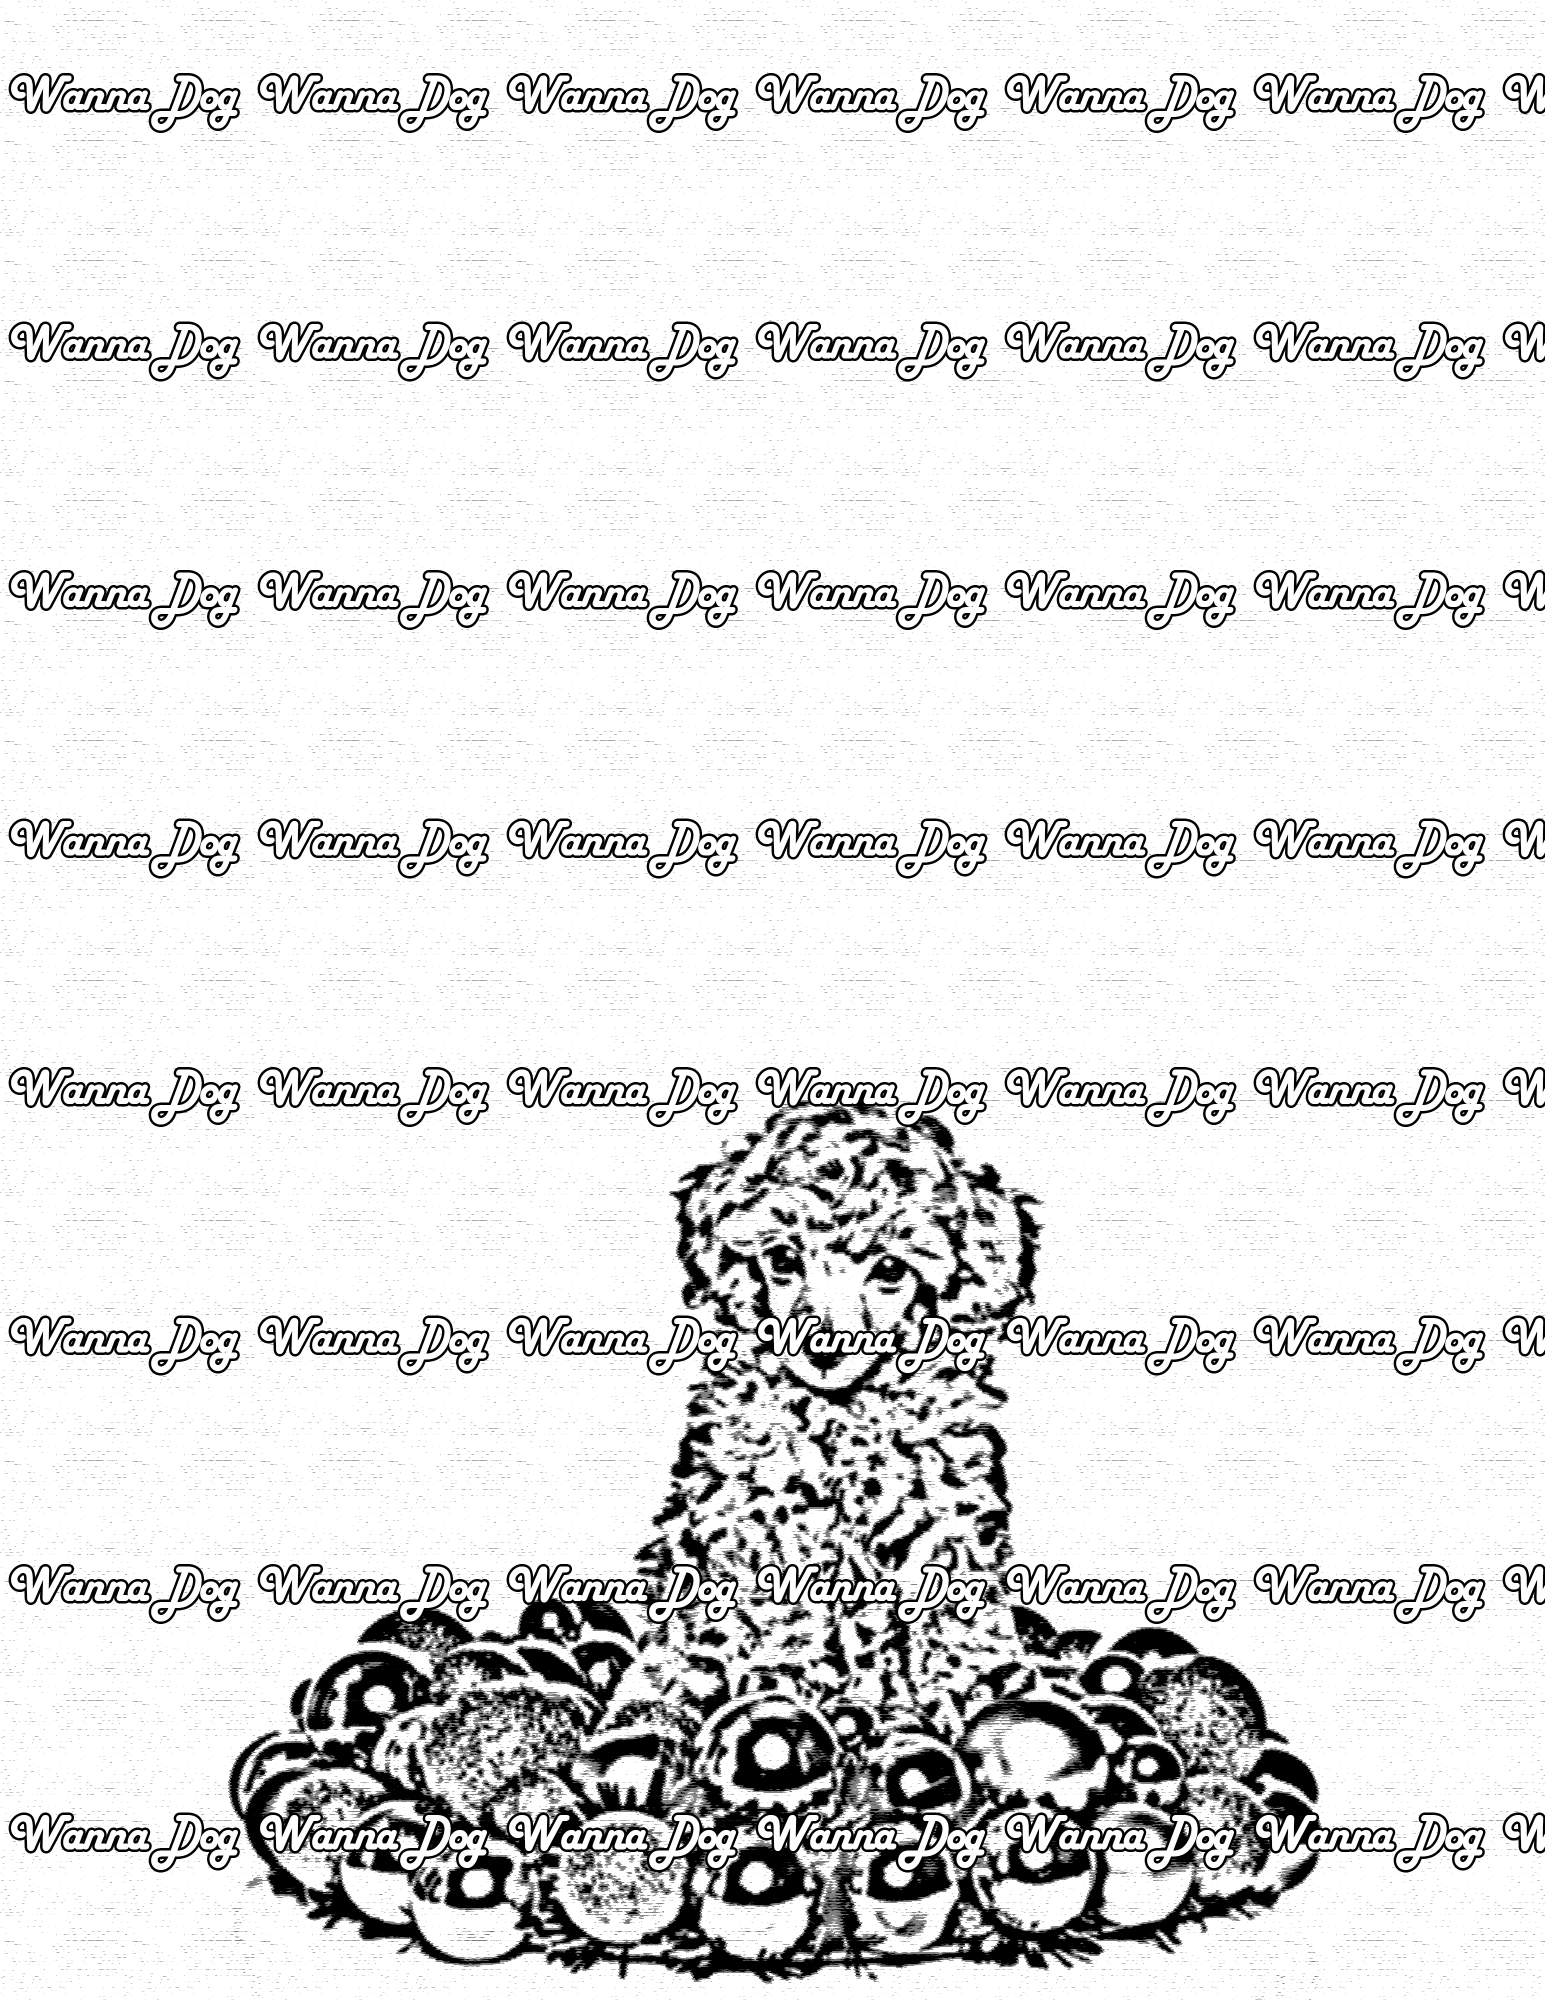 Christmas Puppy Coloring Page of a Christmas Goldendoodle Puppy with decorations